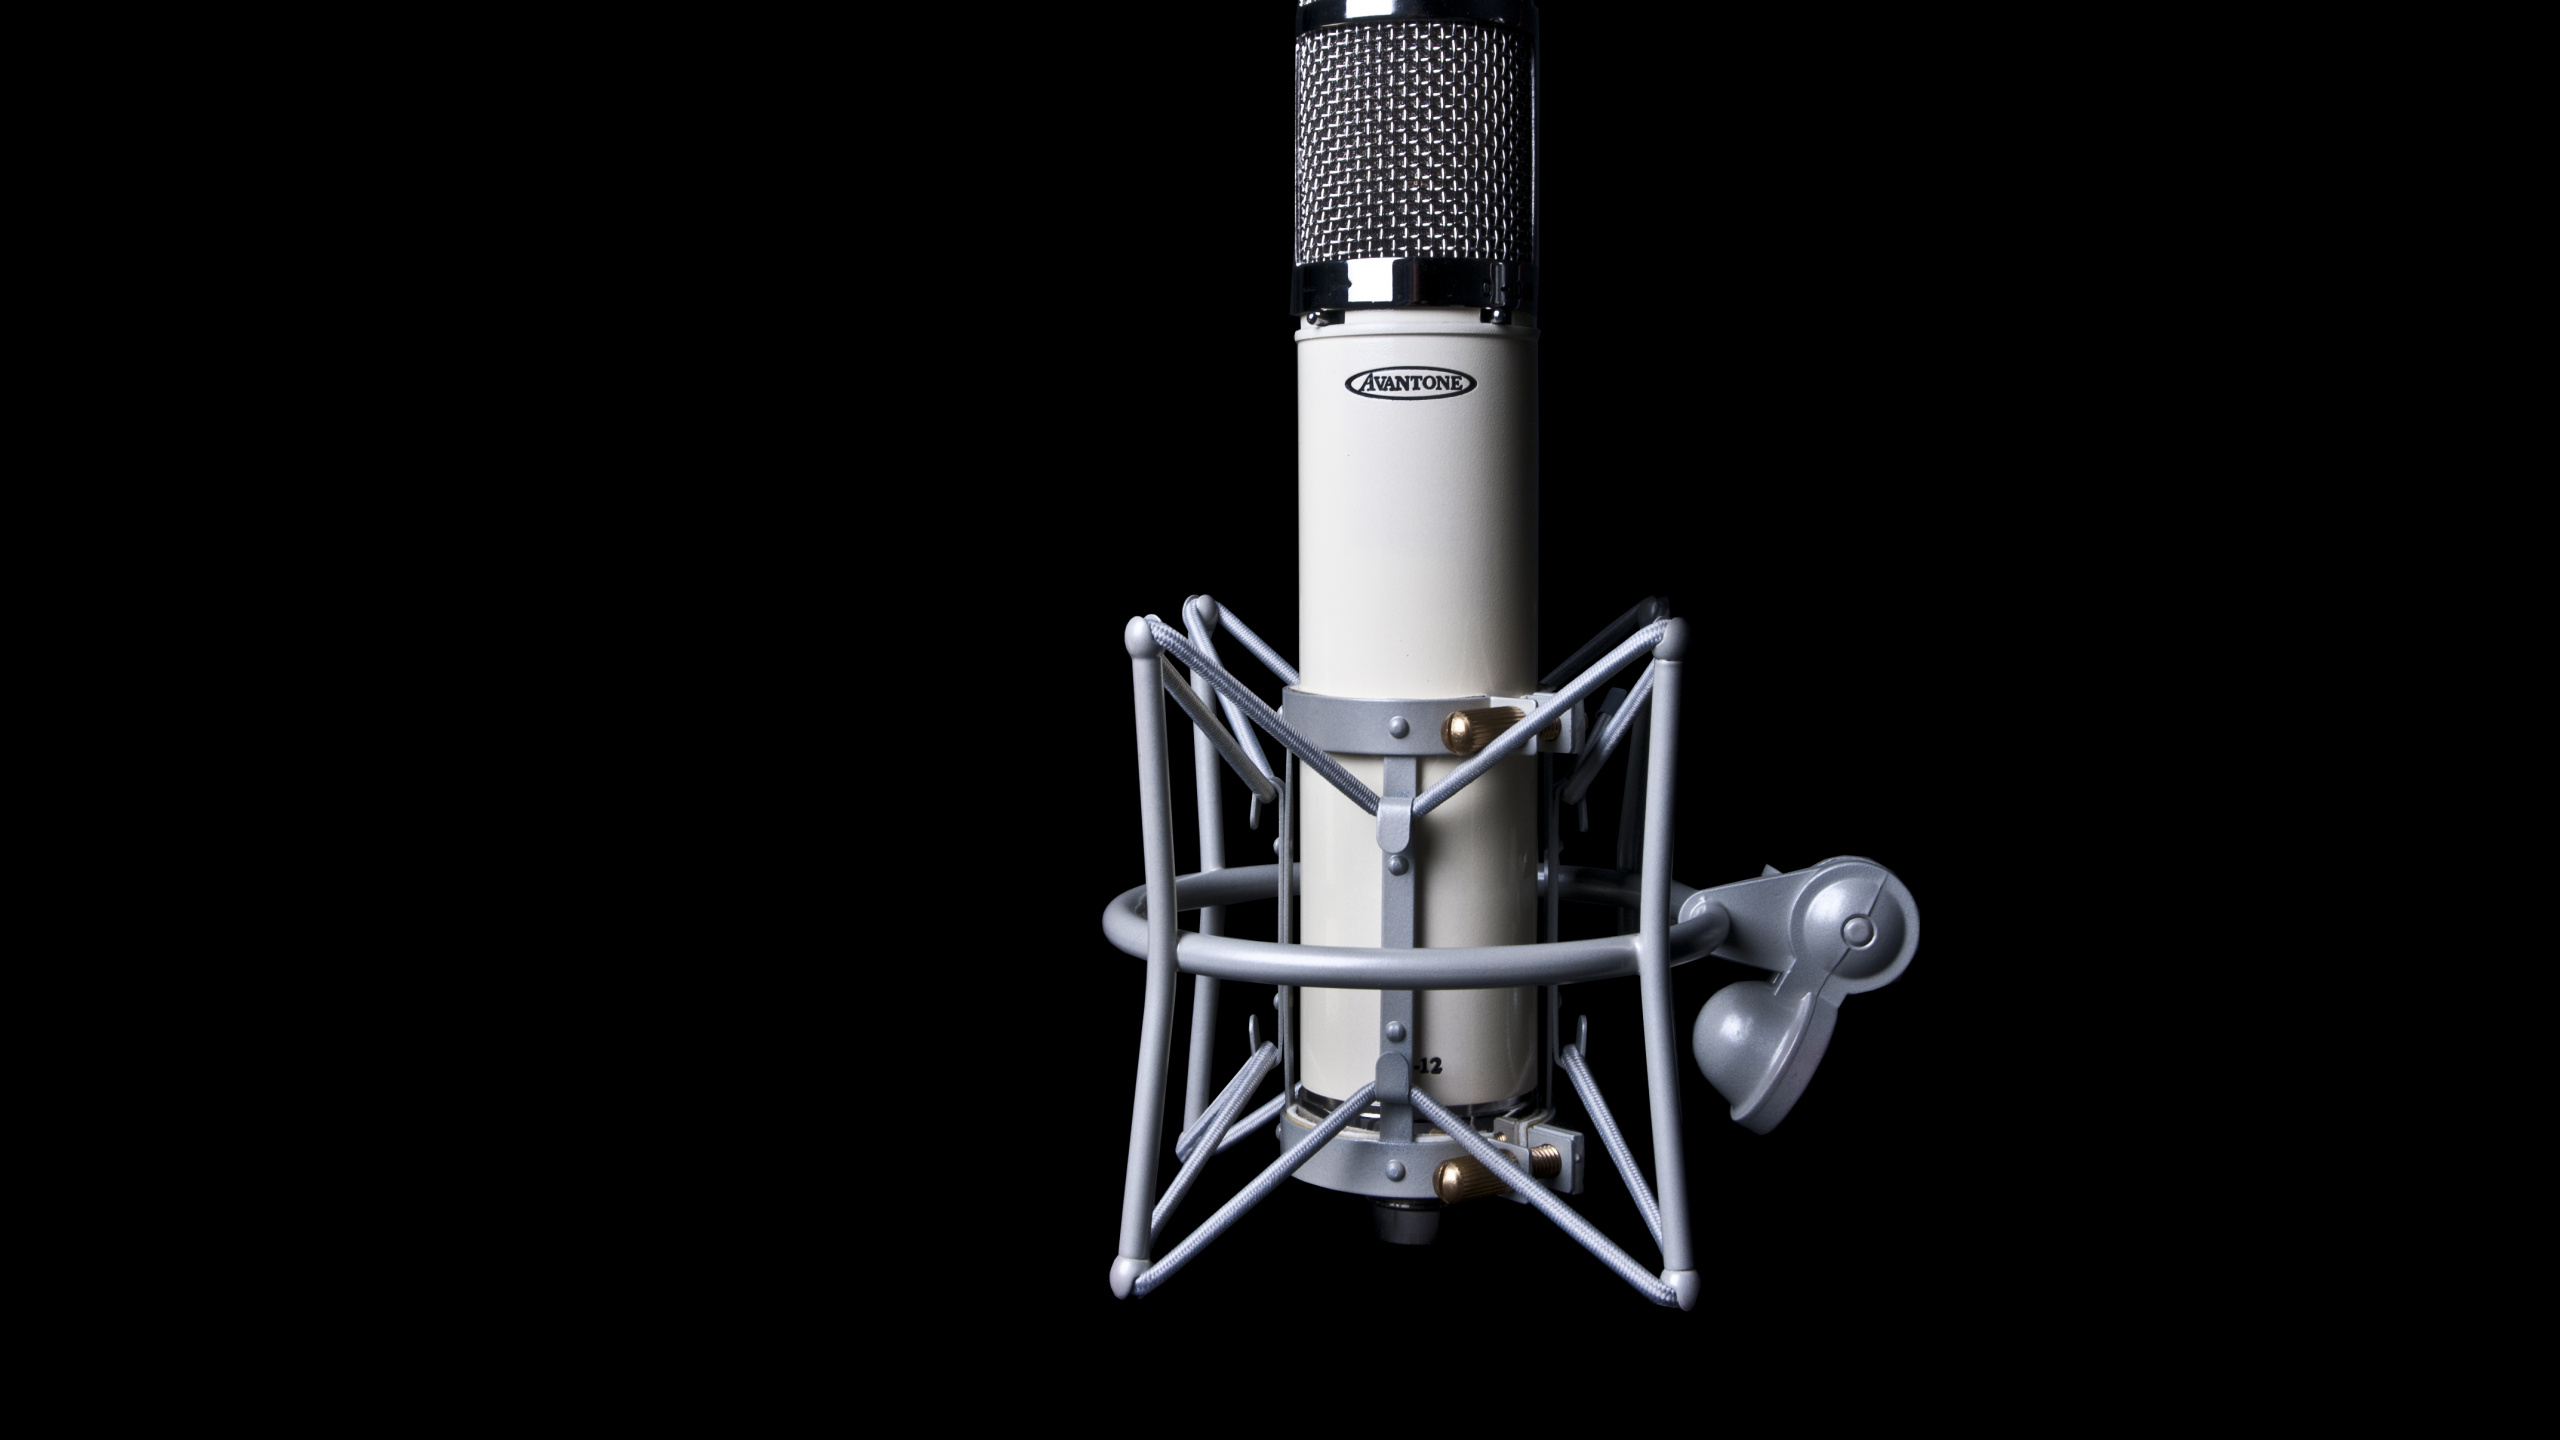 Black and Silver Condenser Microphone. Wallpaper in 2560x1440 Resolution